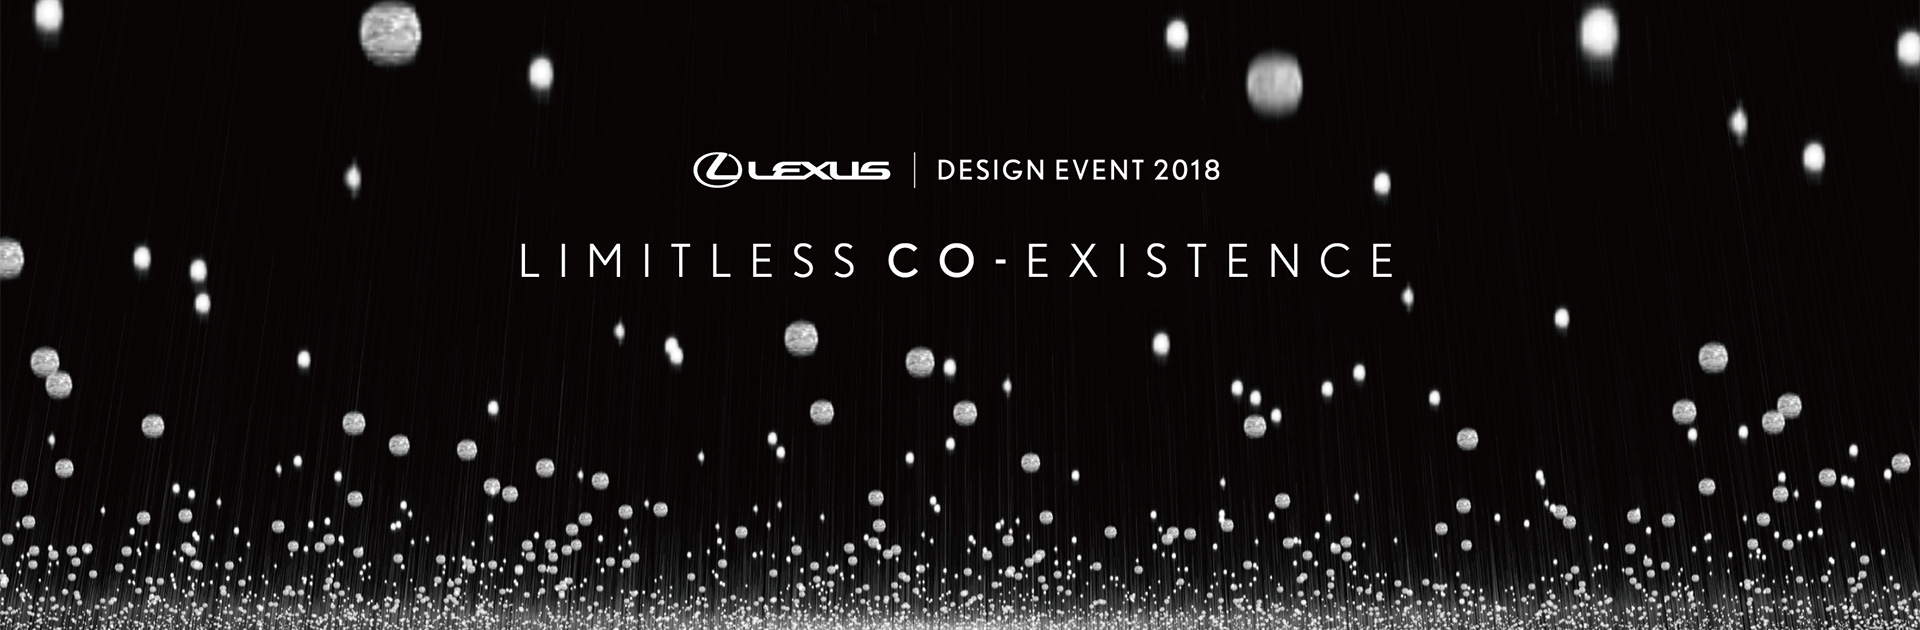 Lexus 'Limitless CO-Existence' Event at Milan Design Week―a Breathtaking Celebration of Harmonious Individuality